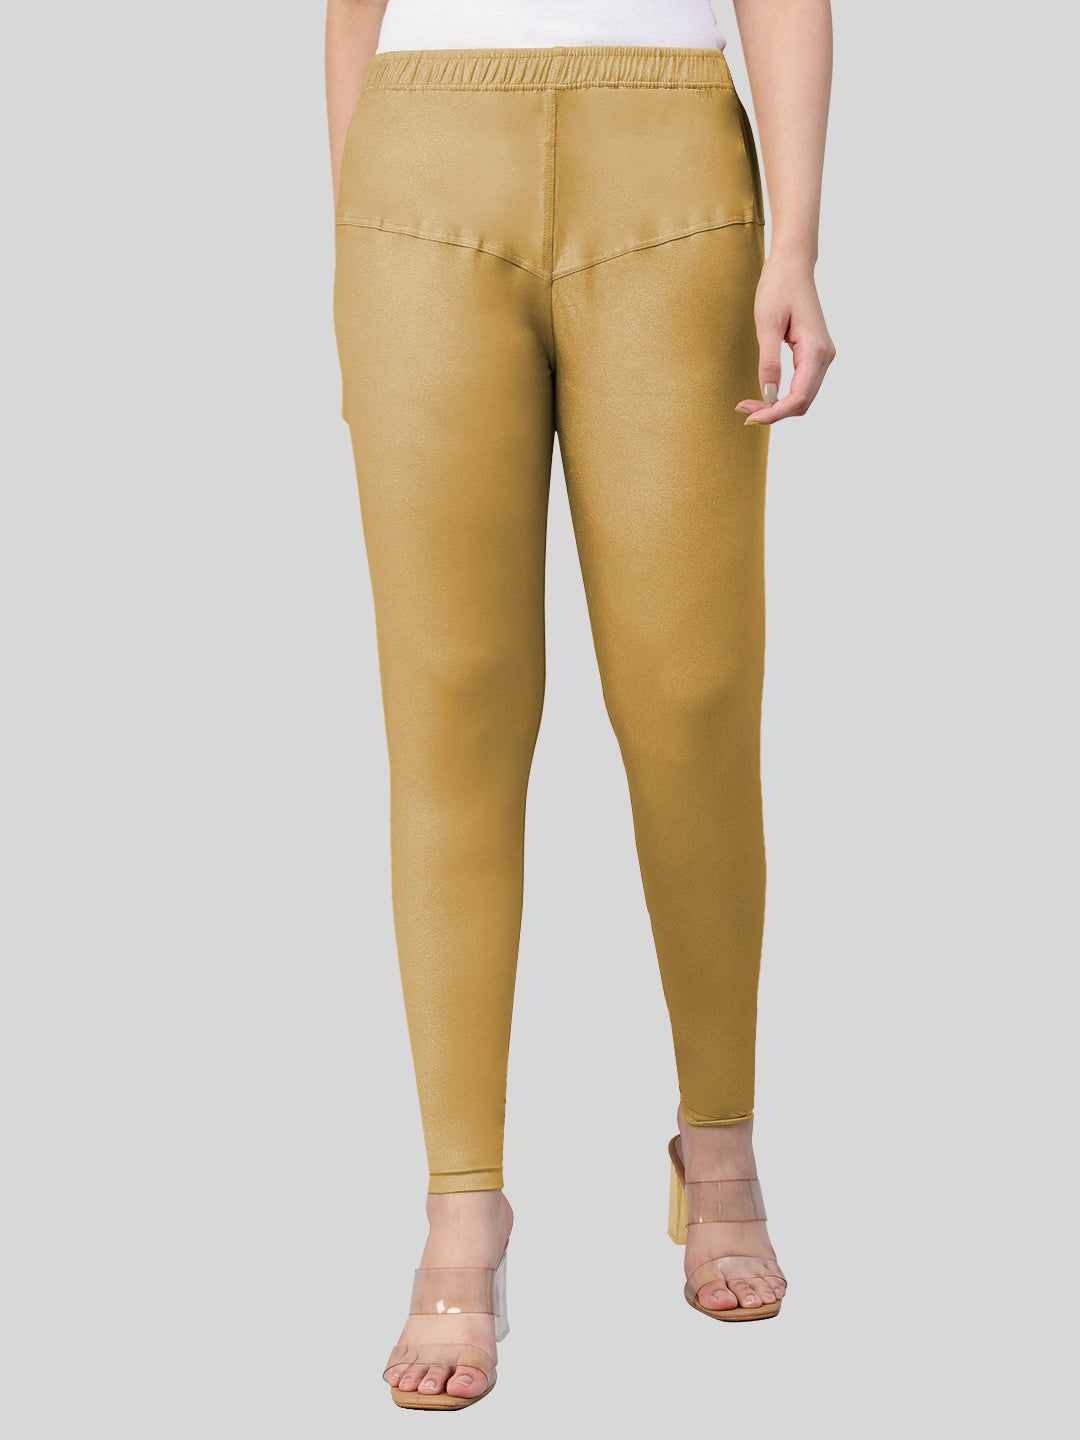 Buy online Golden Solid Ankle Length Legging from Capris & Leggings for  Women by Clora Creation for ₹620 at 38% off